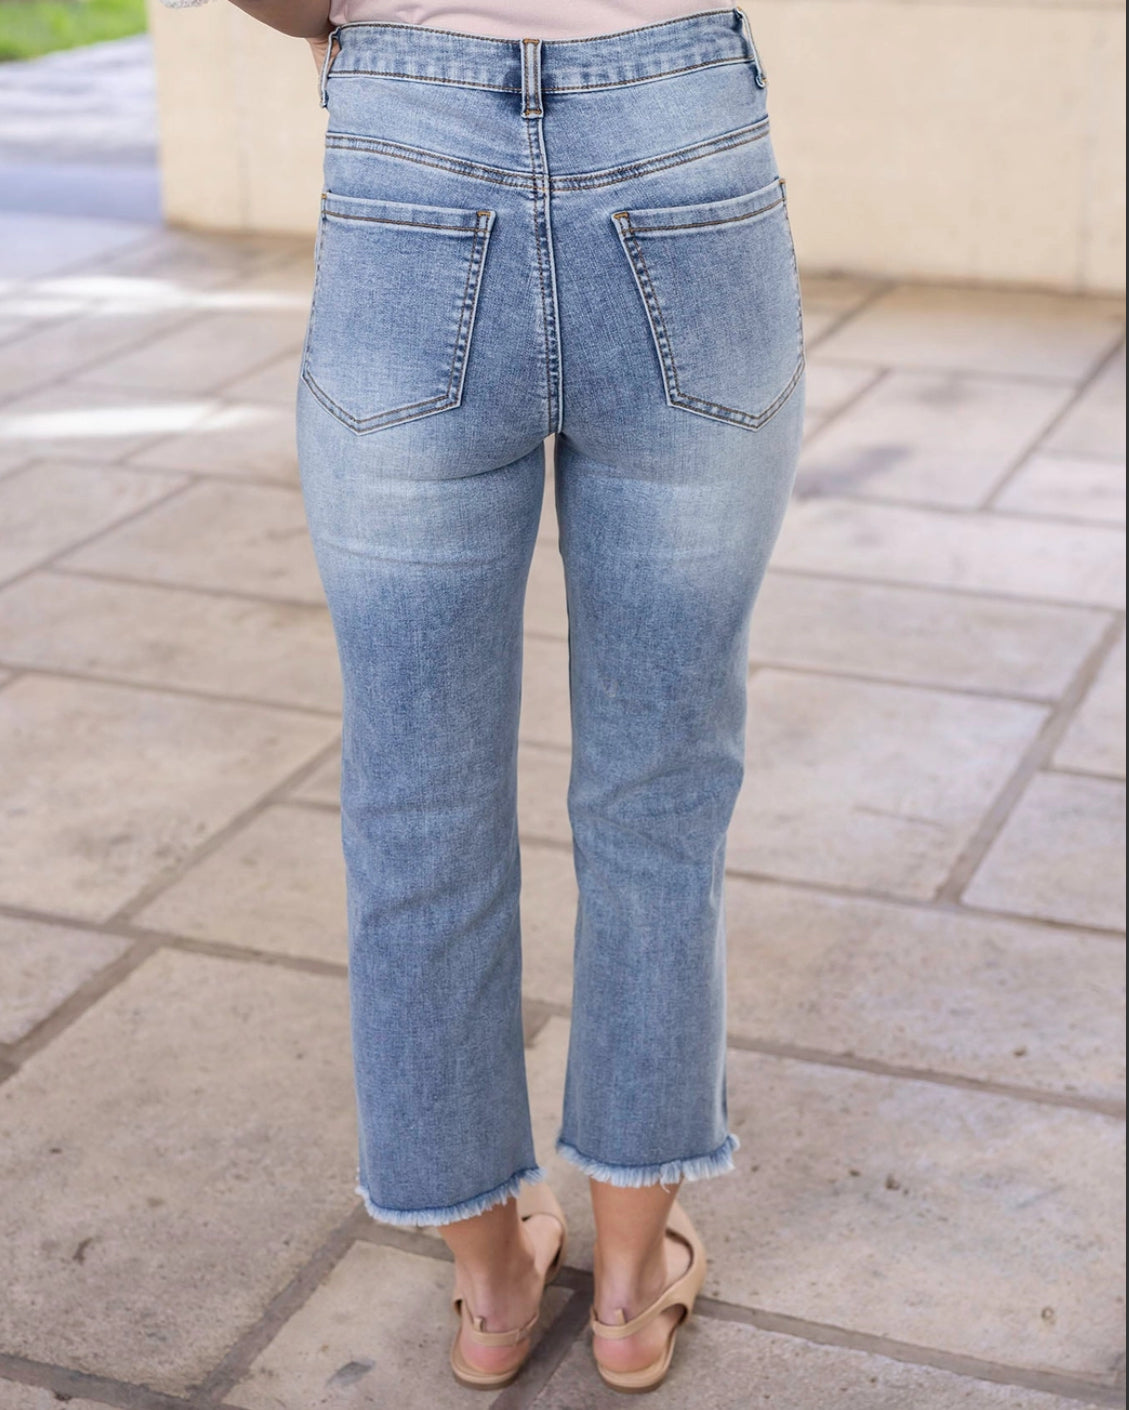 Crop flare denim jeans by Grace and Lace